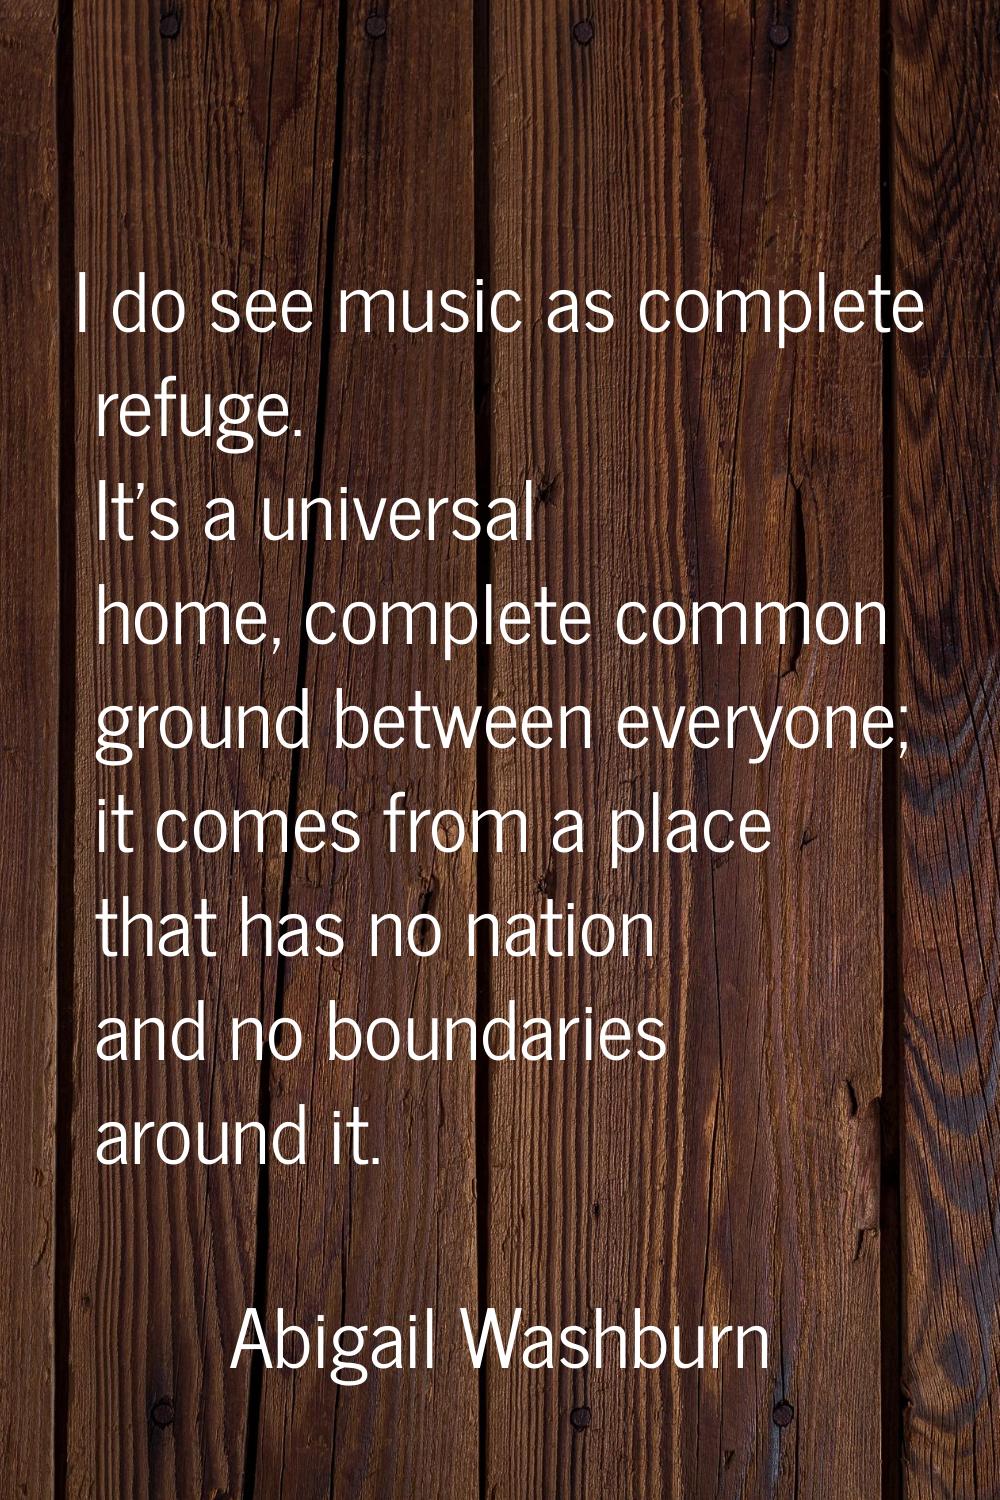 I do see music as complete refuge. It's a universal home, complete common ground between everyone; 